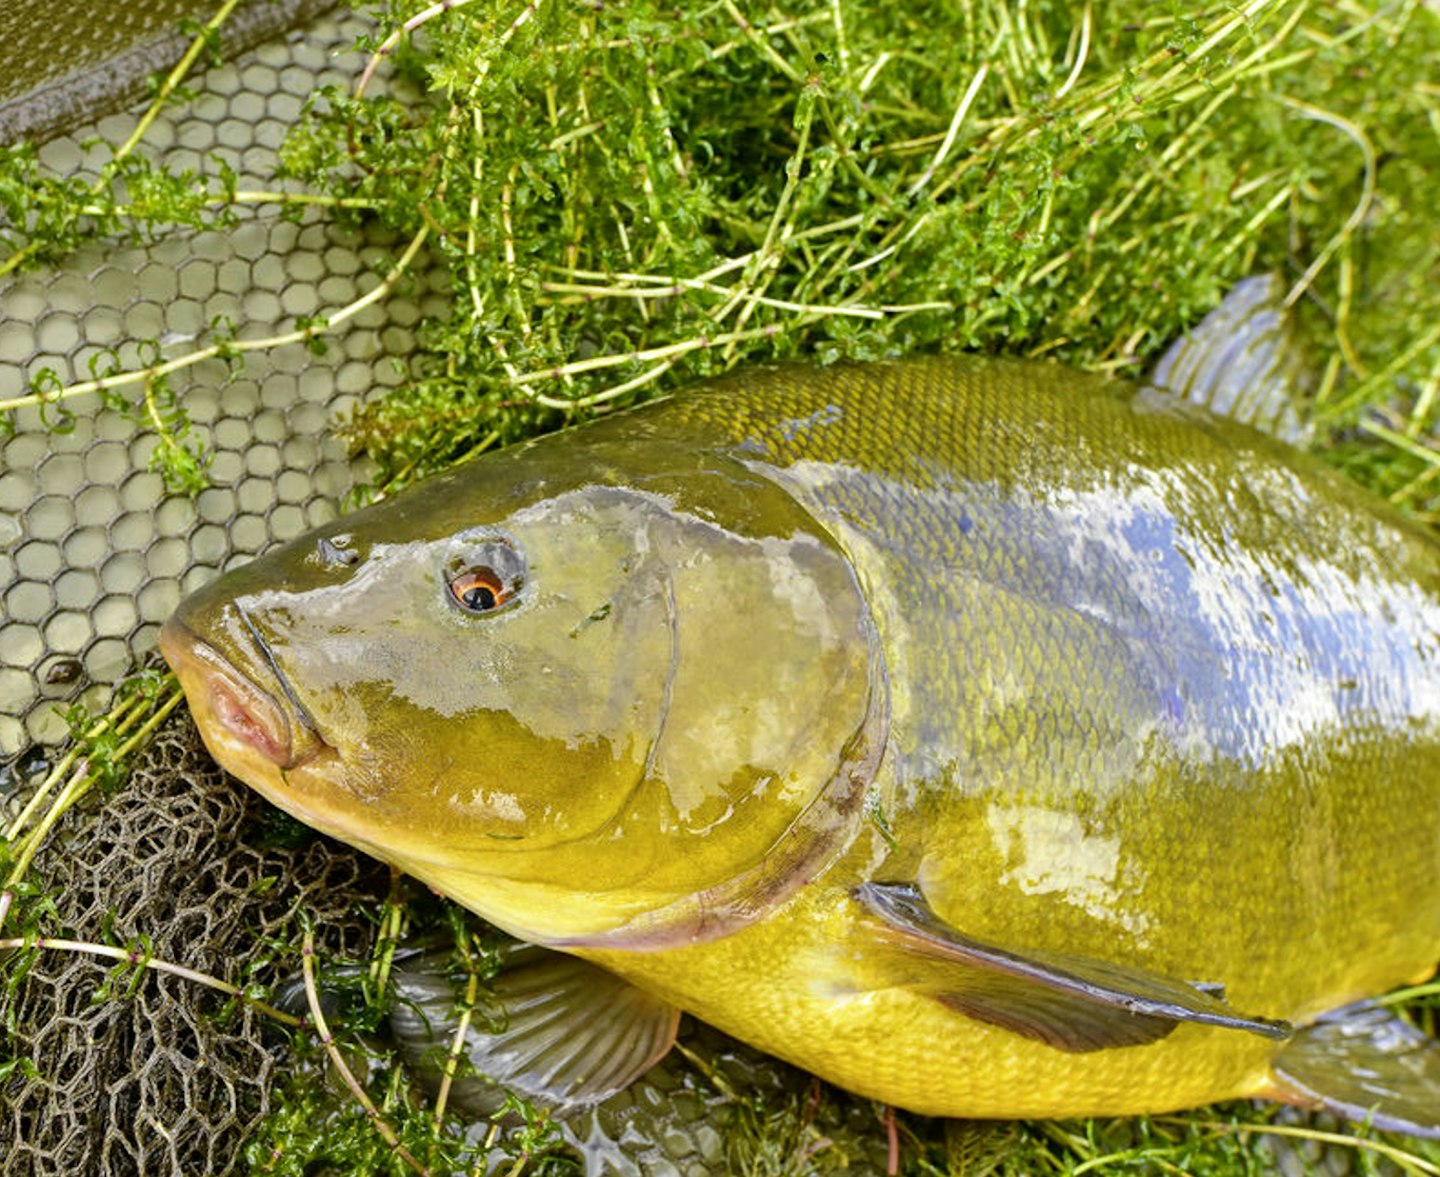 There’s something magical and mythical about tench